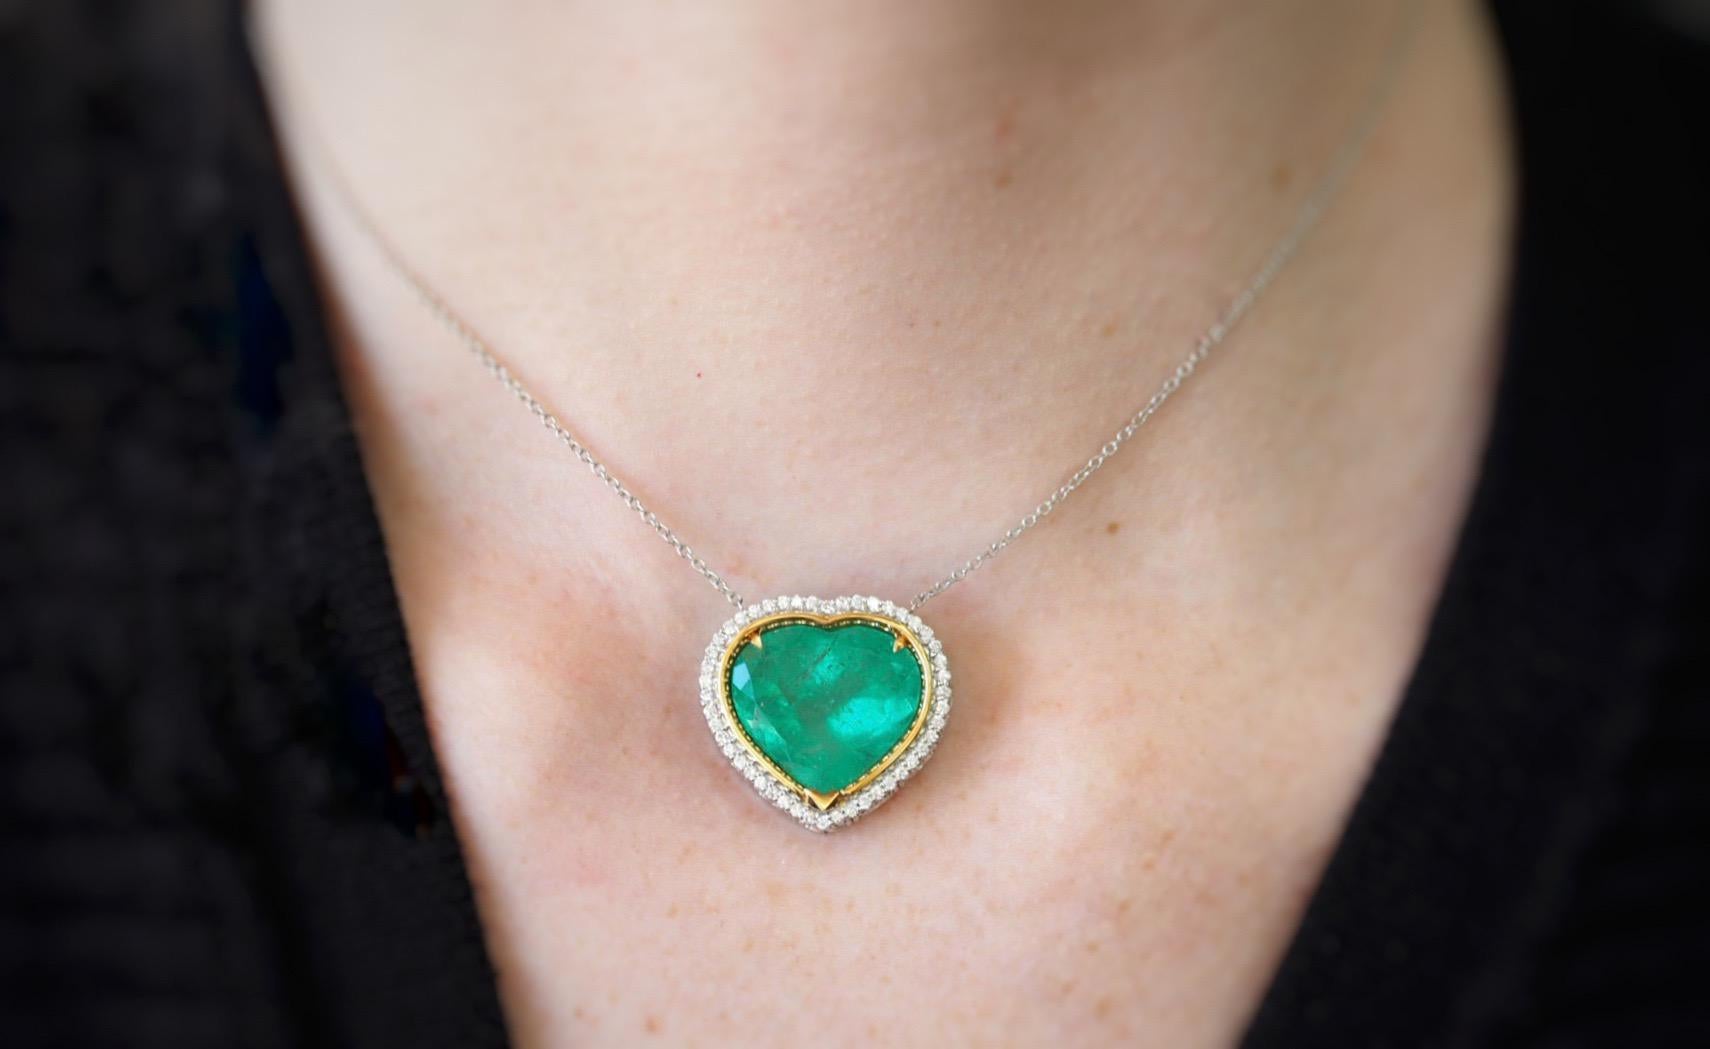 This tantalizing emerald heart pendant is certain to have you hypnotized. It was custom created by our incredible custom department team. The green heart Colombian emerald  measures 16.35mm X 18.22mm X 10.11mm, weighing 15.02 carats with a desired